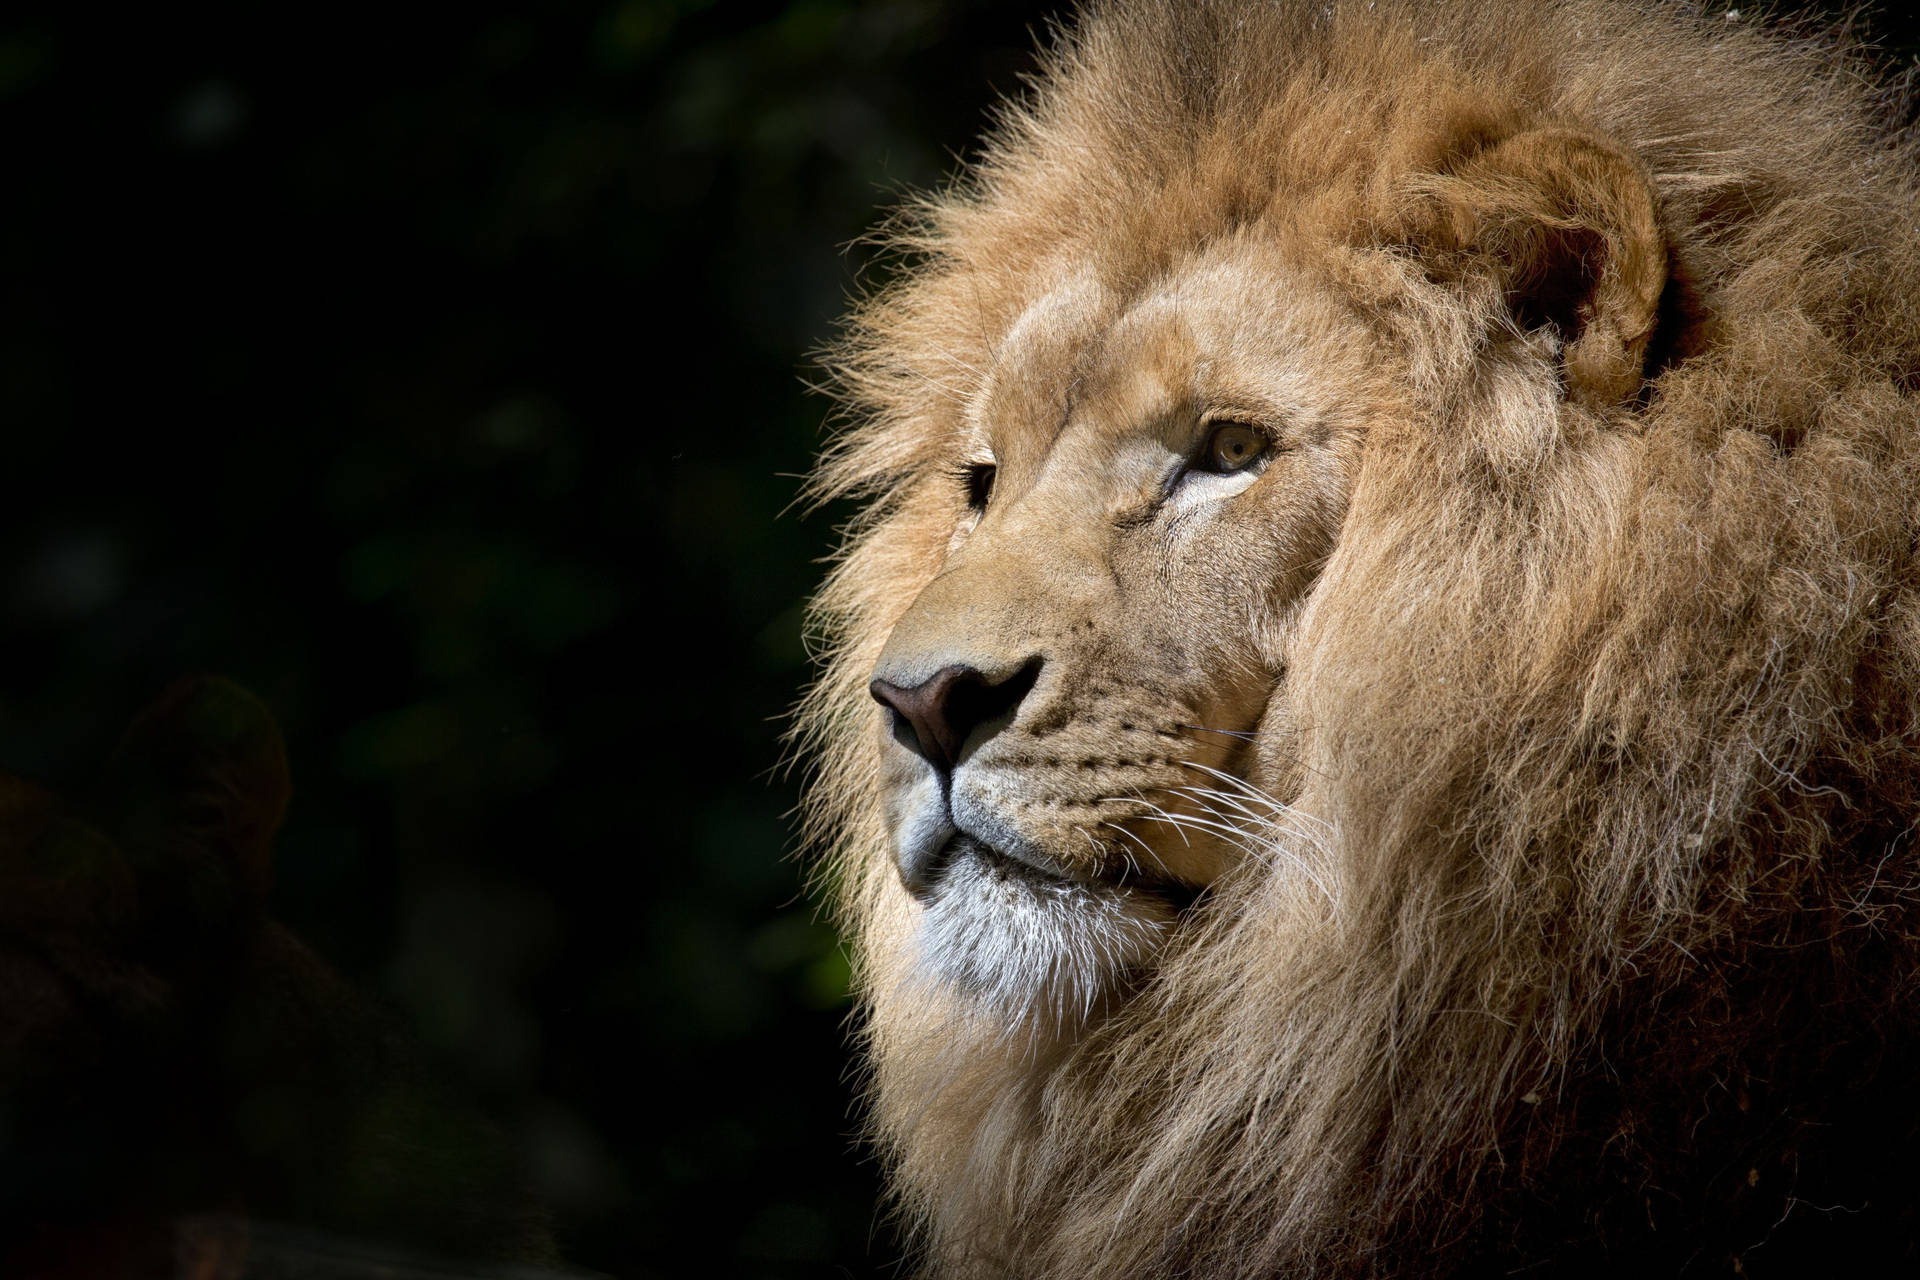 HD wallpaper of close-up of lion's face with thick mane.  